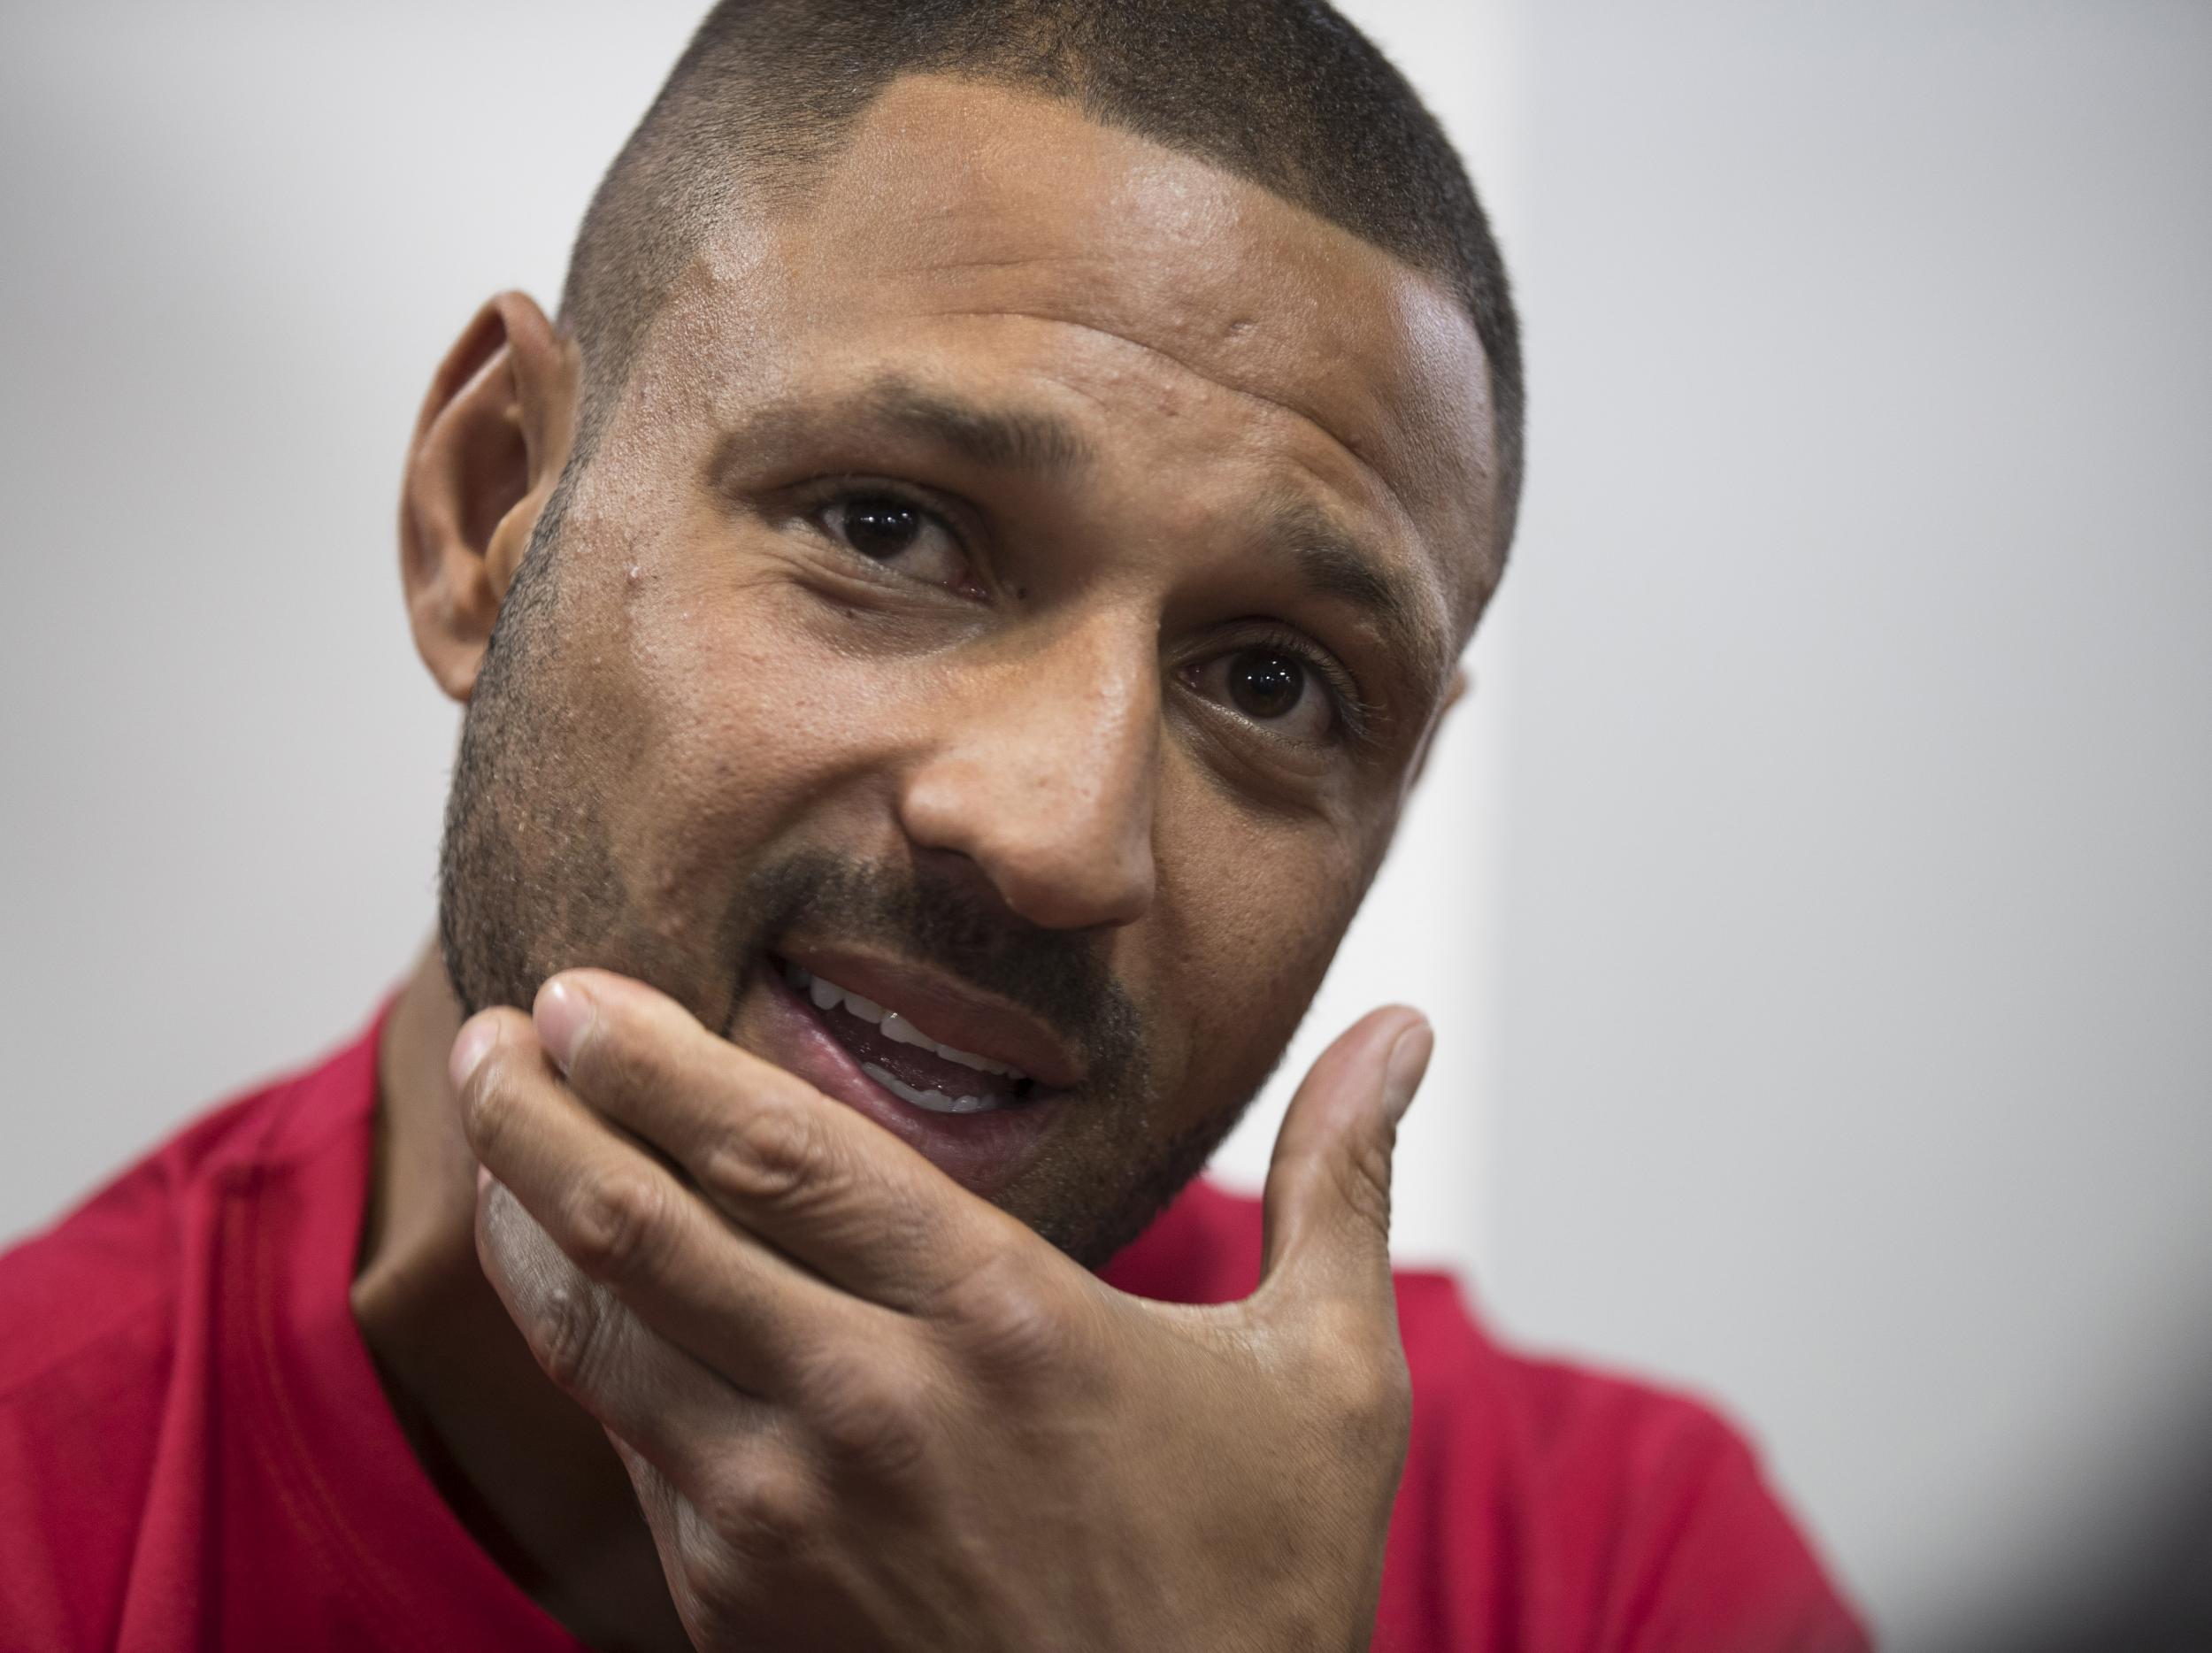 Kell Brook hopes to fight Amir Khan by the end of the year